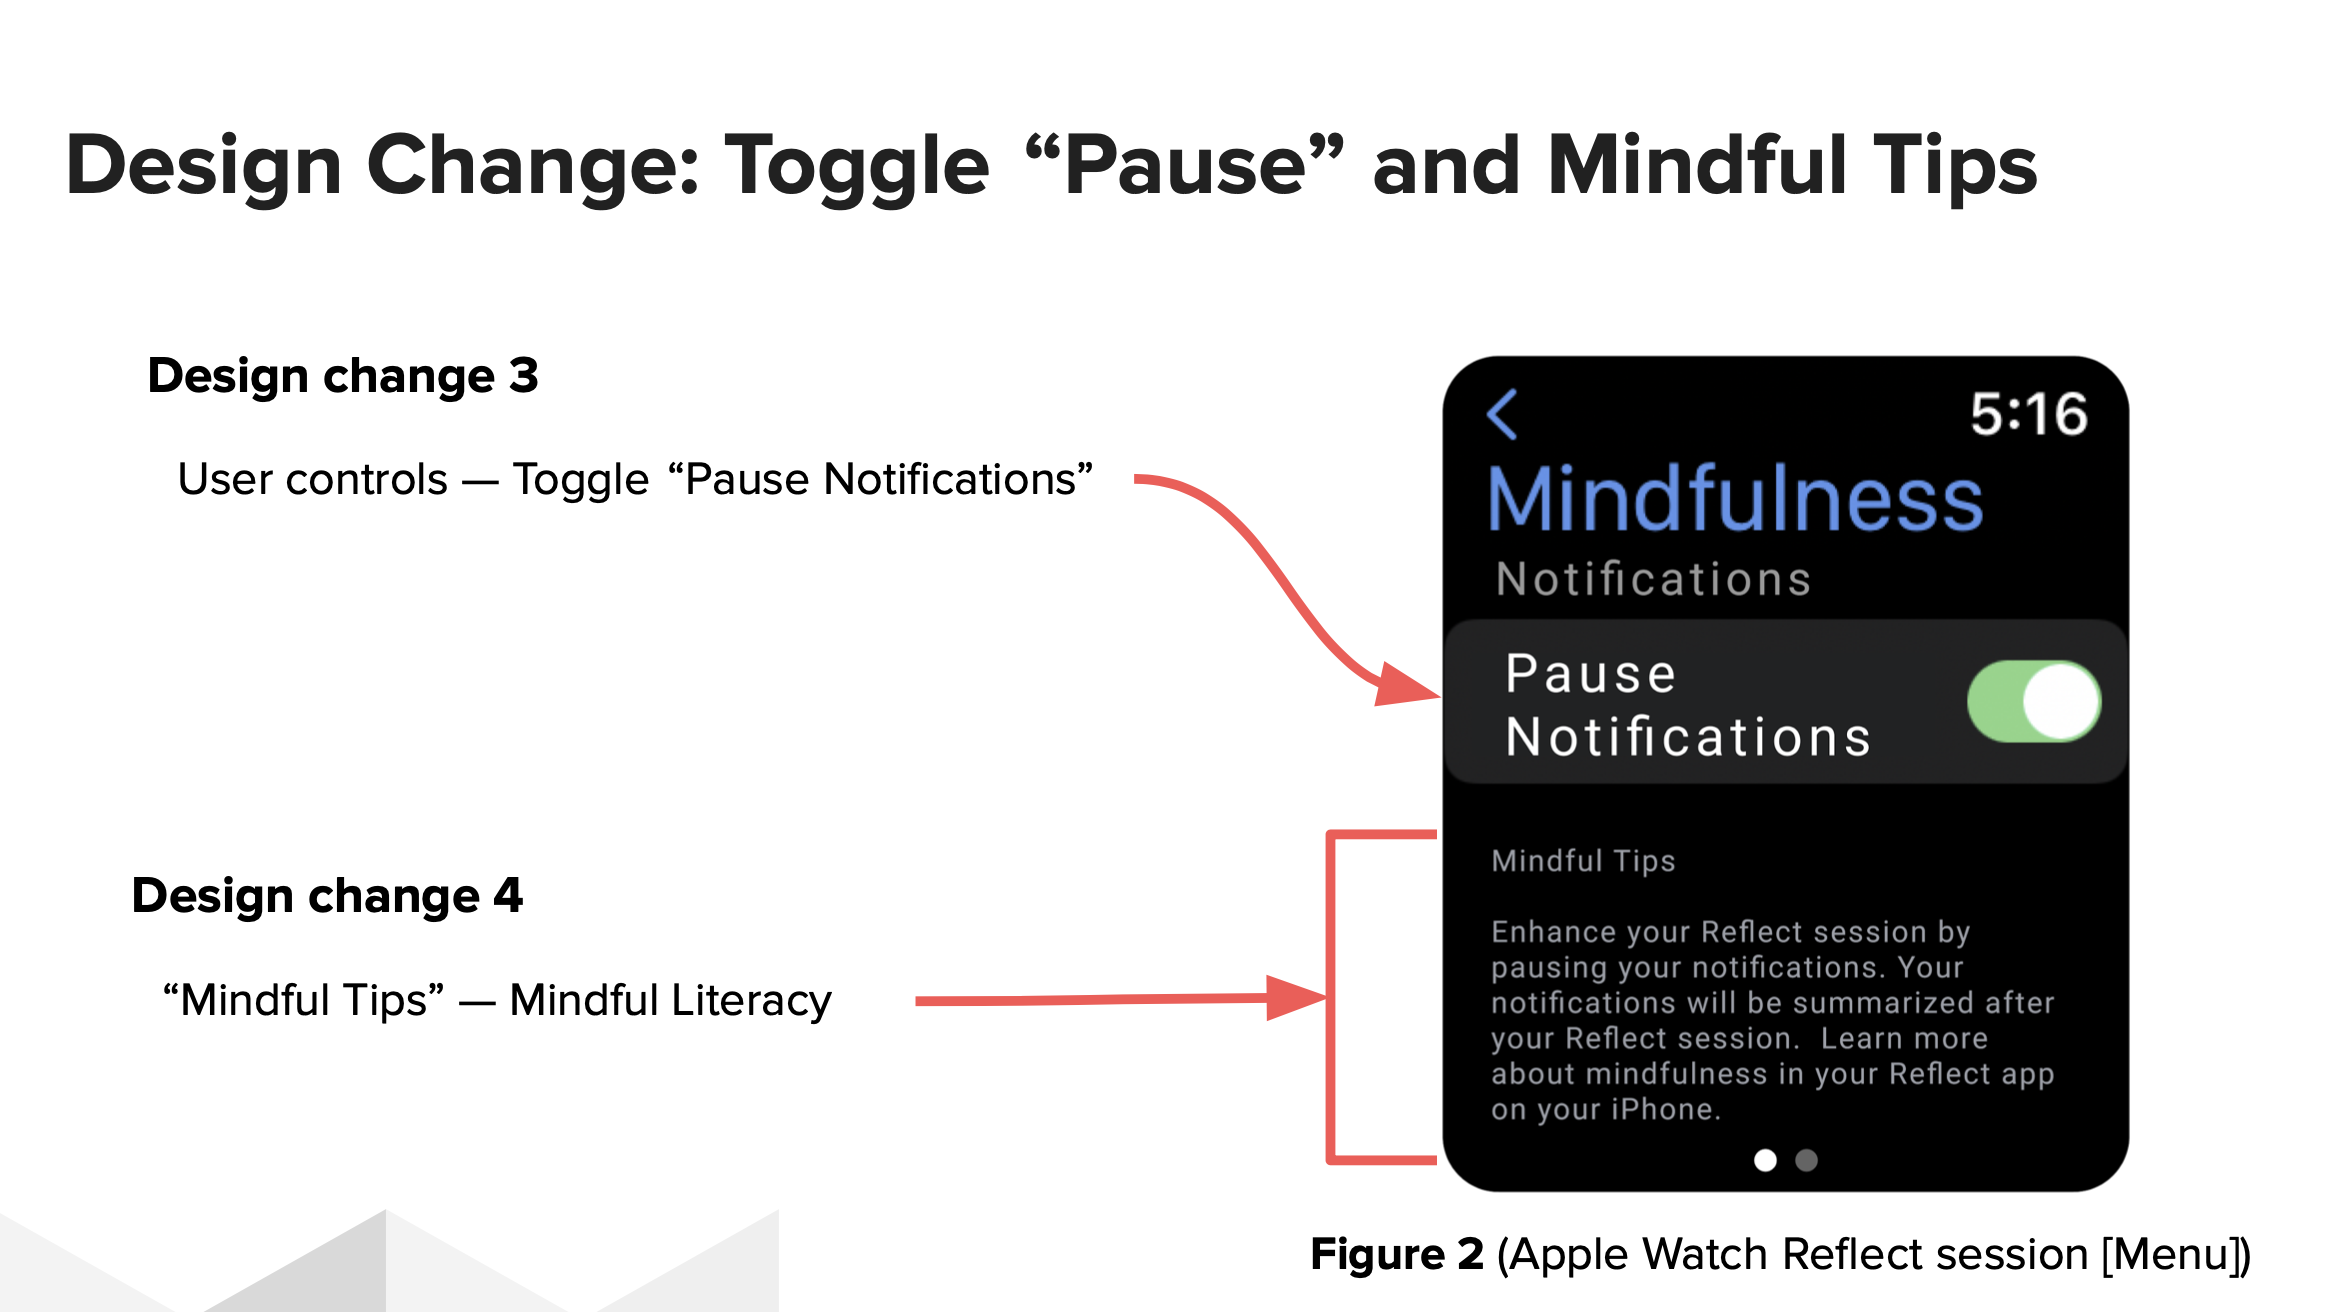 Toggle “Pause” and Mindful Tips. User control allows the user to toggle the pause notifications. Mindful Tips — Digital literacy with instructions to learn more about mindfulness on the iPhone